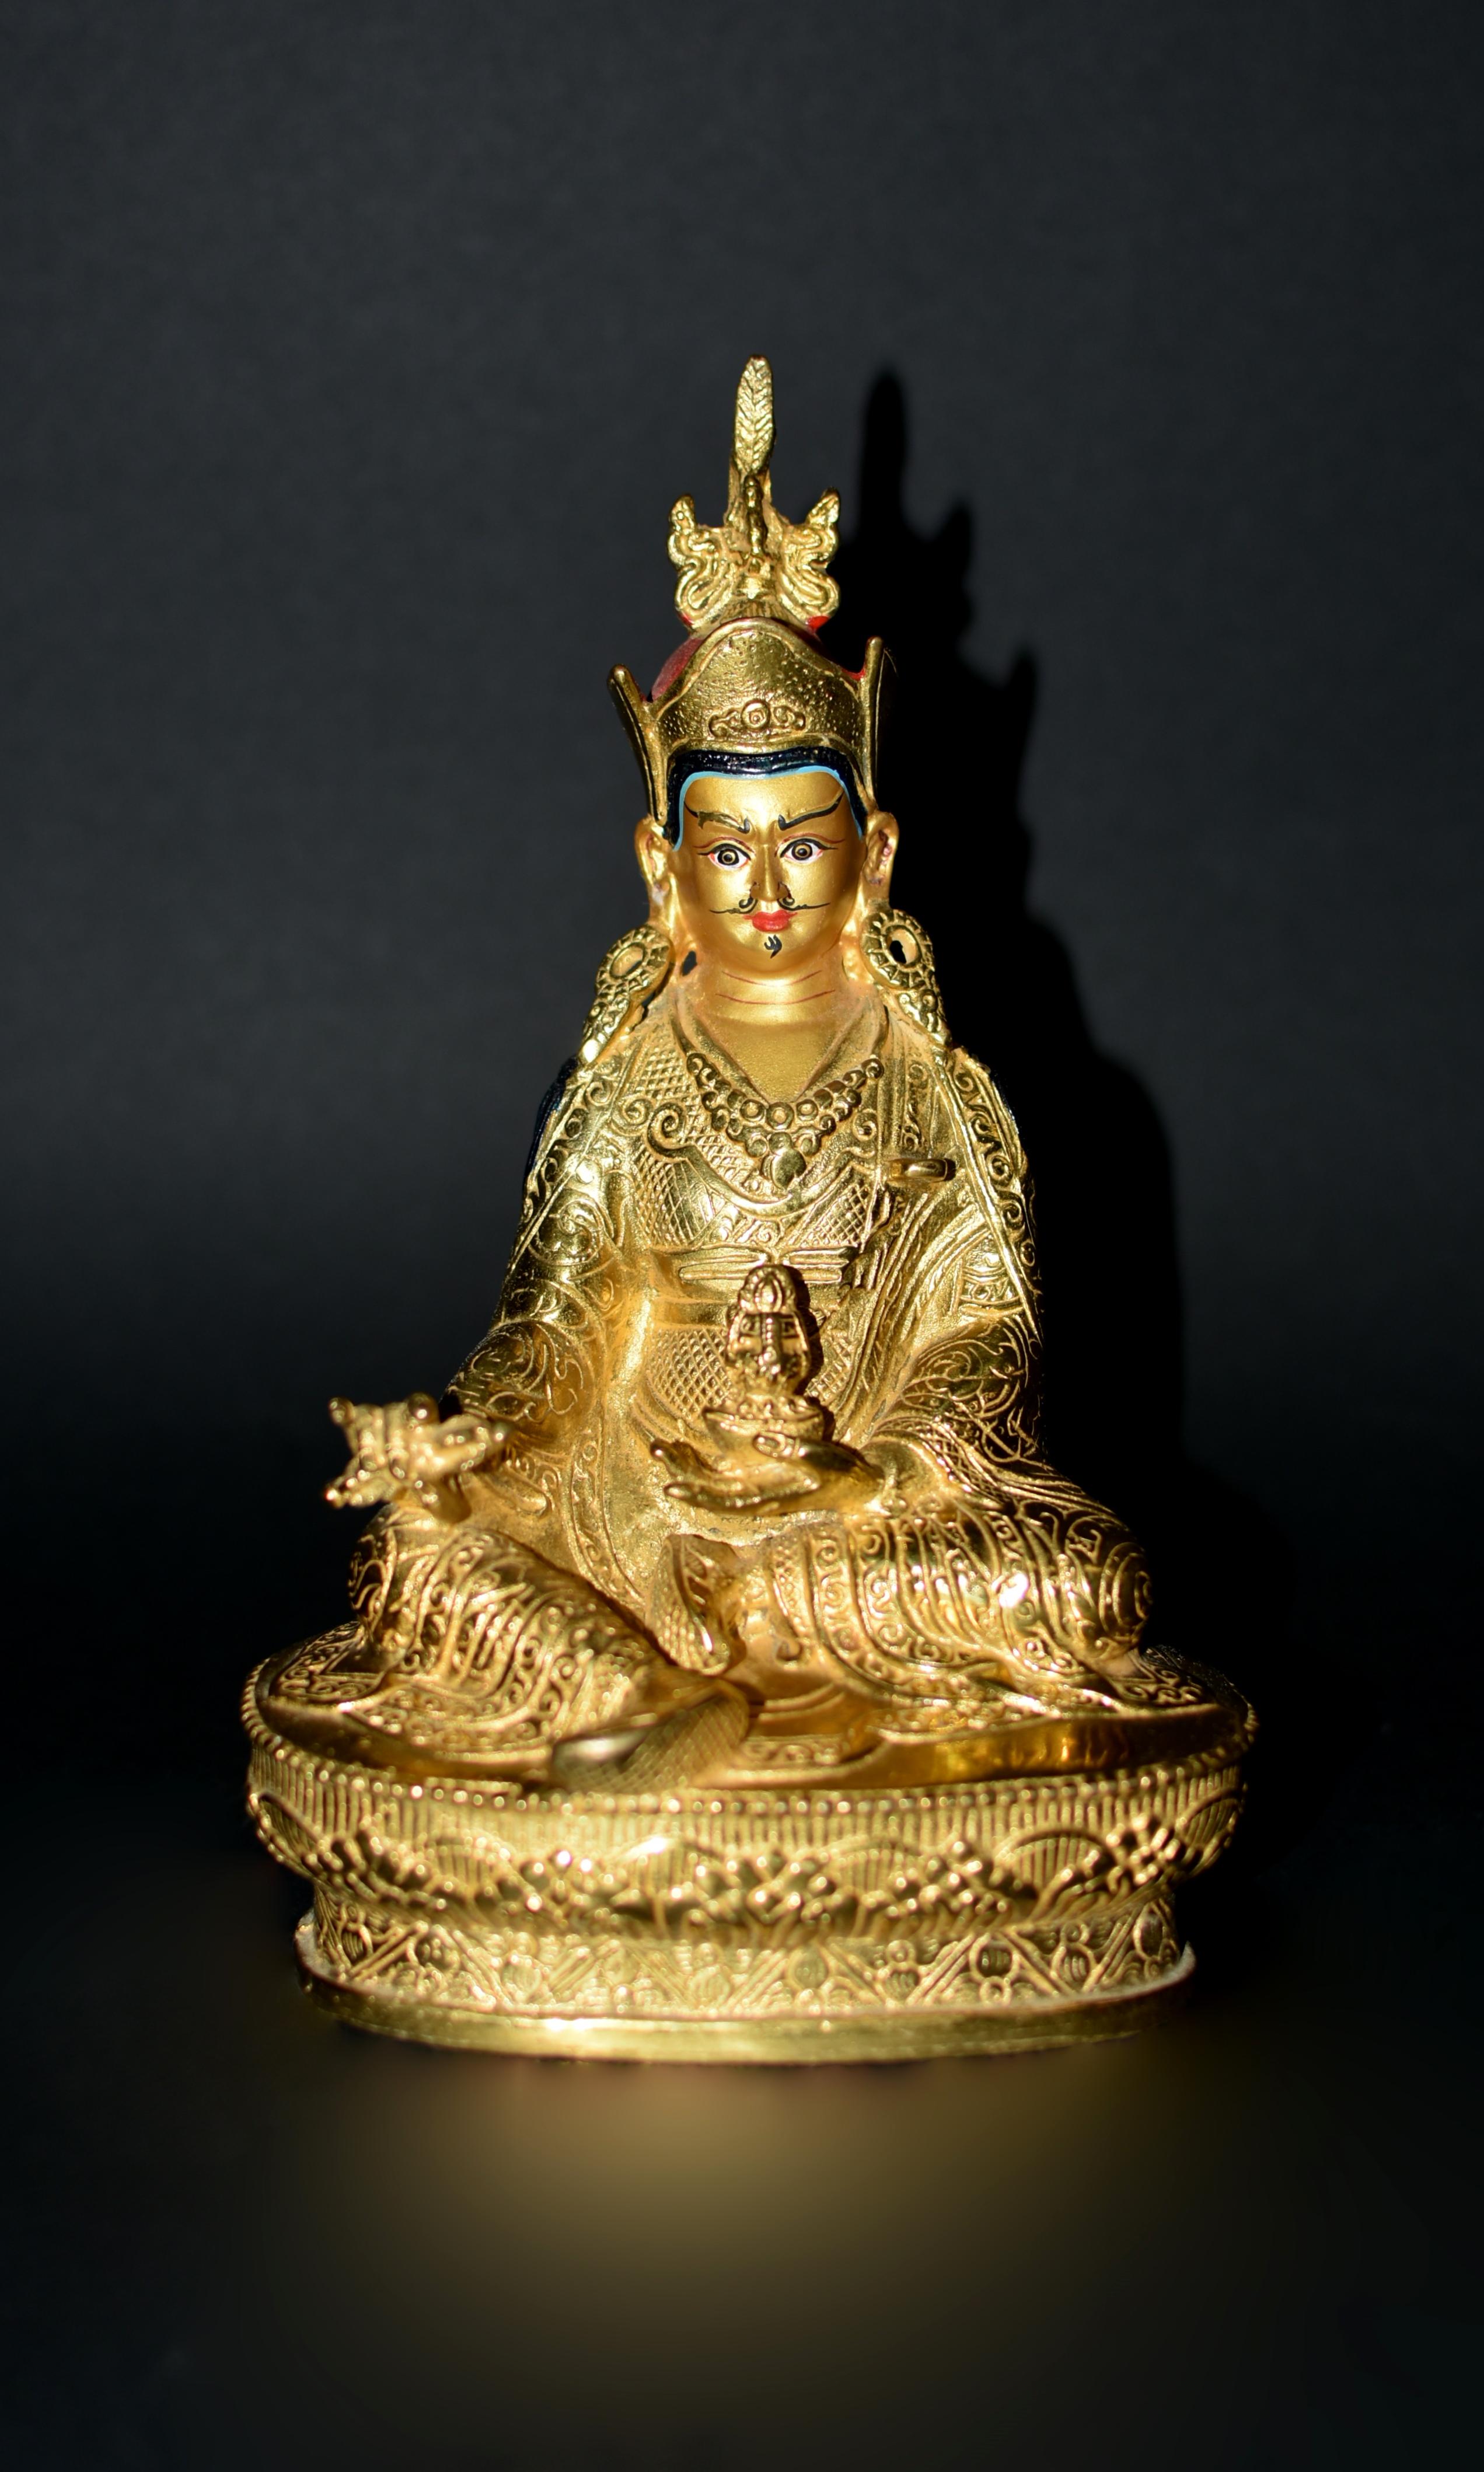 A beautiful, gilded bronze statue of Padma Sambhav, the founder of Tibetan Buddhism. This 2 lb statue is very finely made showcasing every detail from top to base, with hand painted facial features and gilding of the highest quality. Seated in an